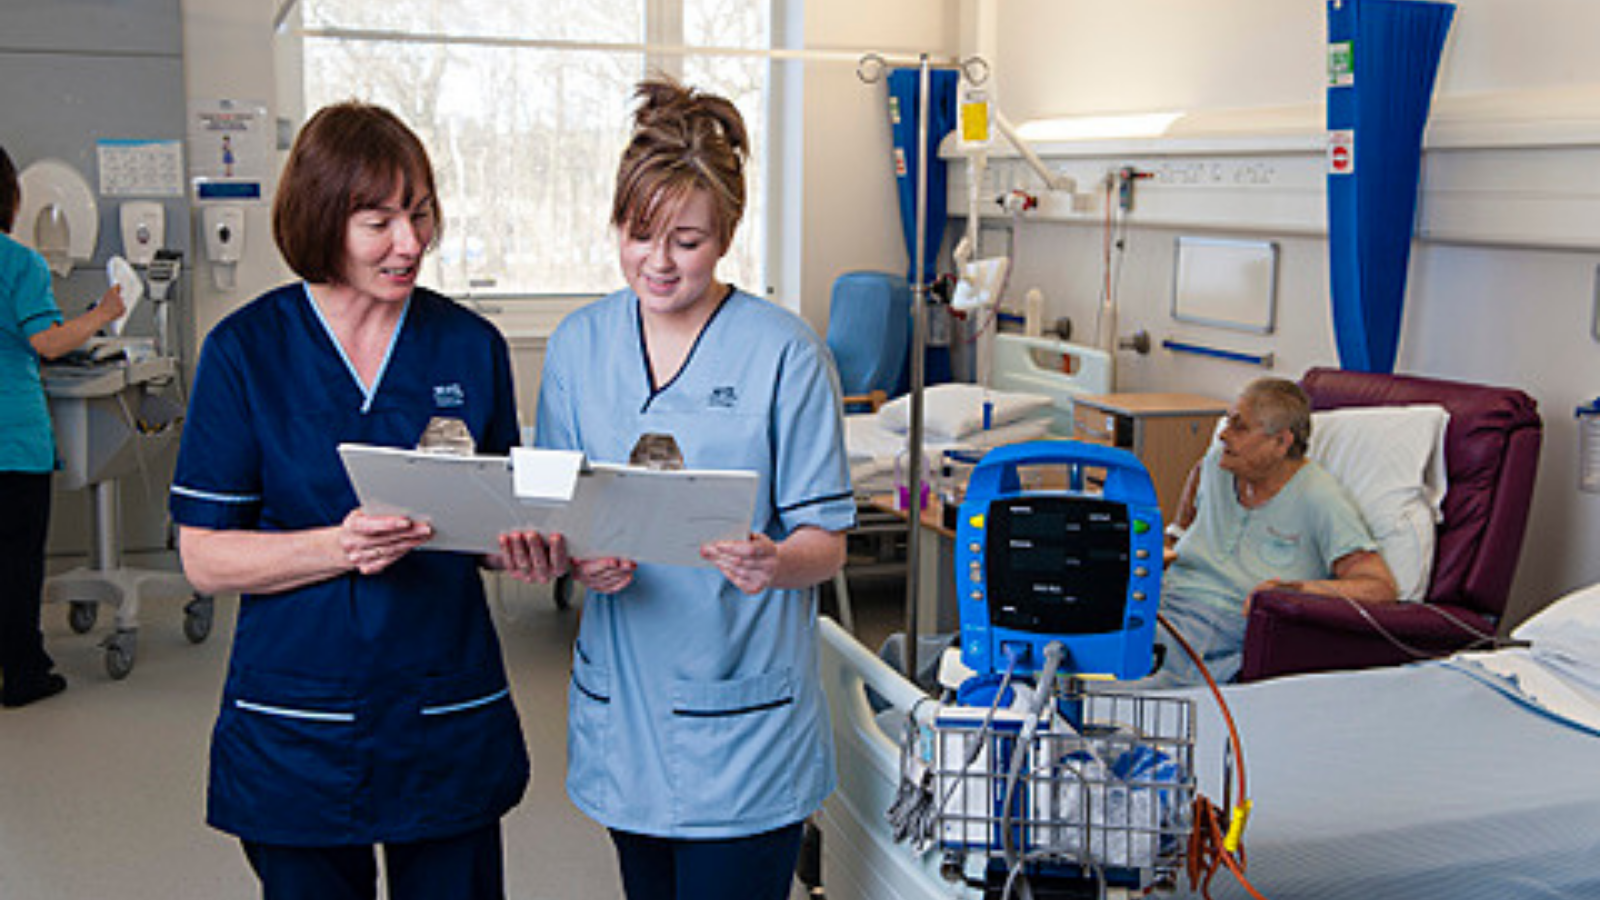 NHS staff discussing patient in ward